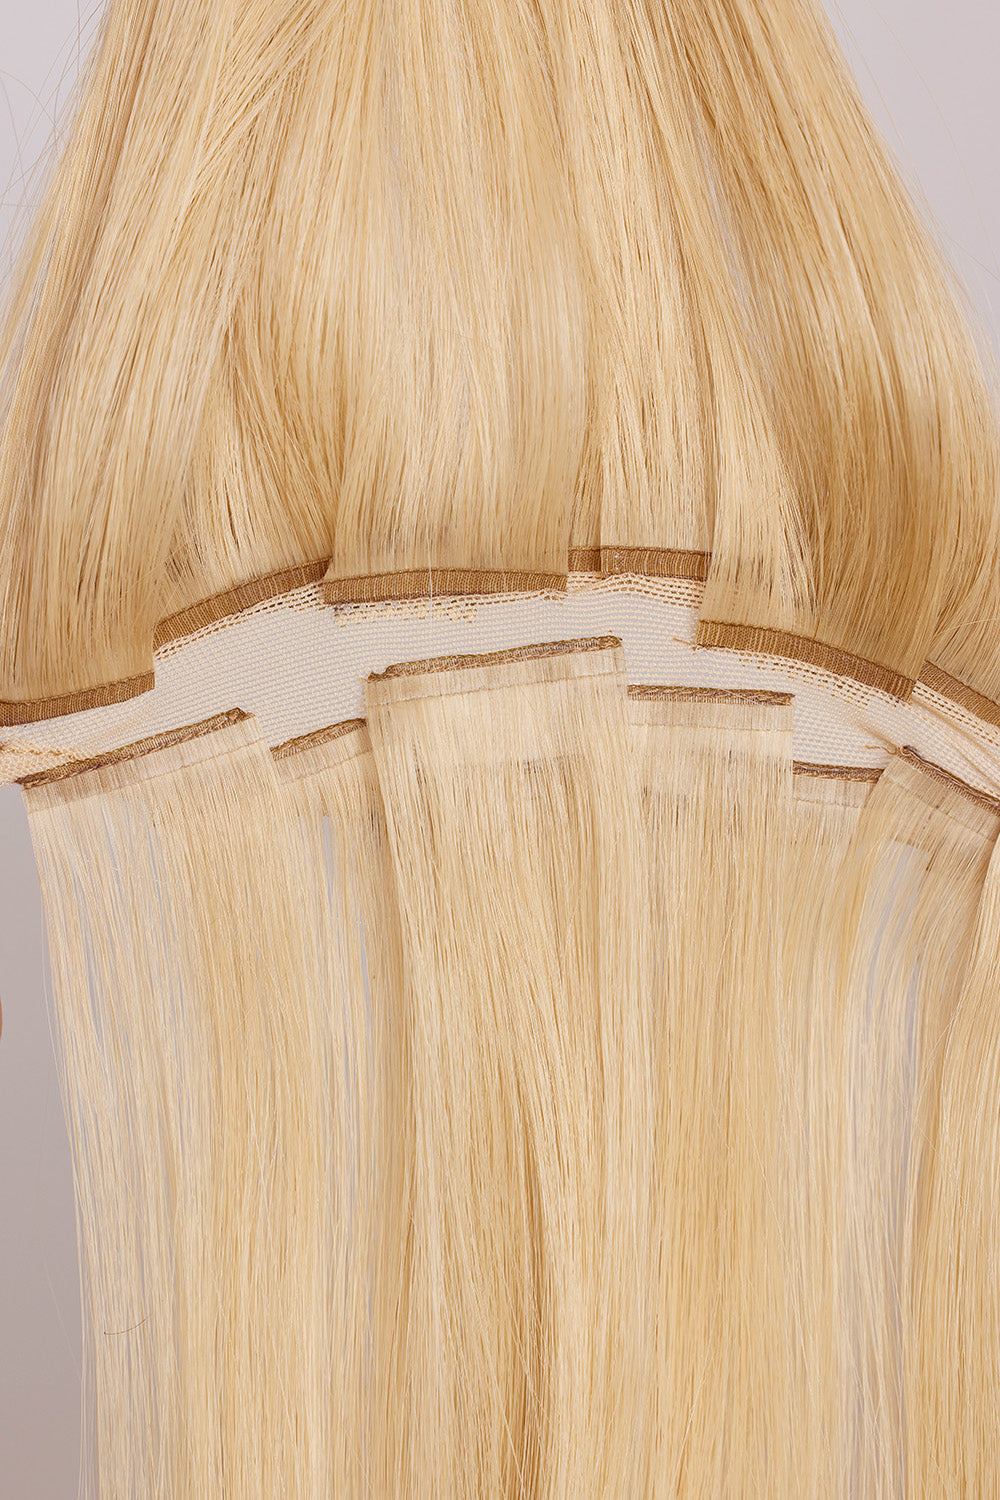 Inside view of BHBD Hairband 40cm: hair extensions attachment.